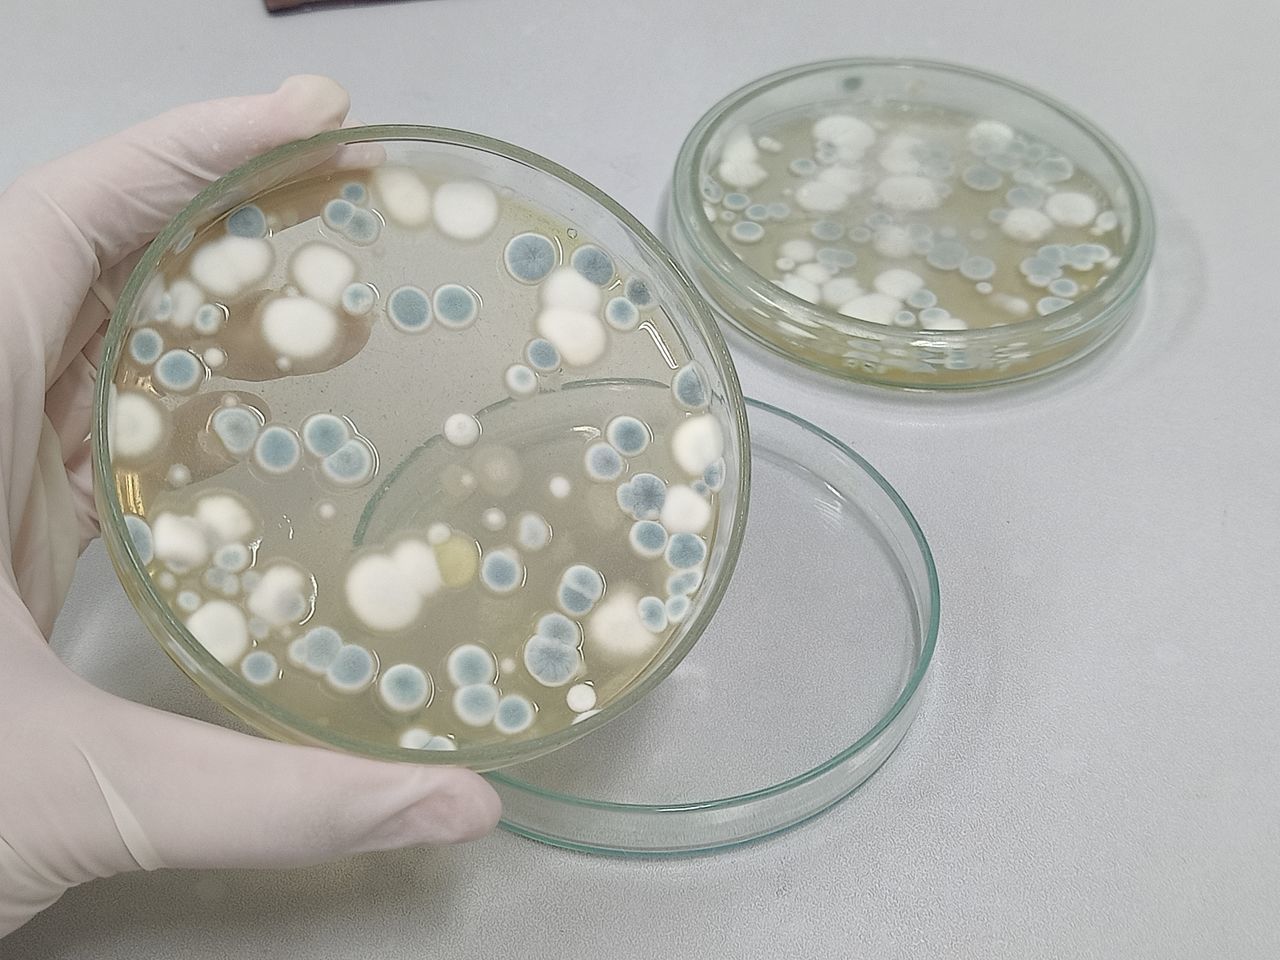 hand, indoors, one person, science, healthcare and medicine, research, holding, lighting, scientific experiment, biology, education, laboratory, high angle view, petri dish, occupation, adult